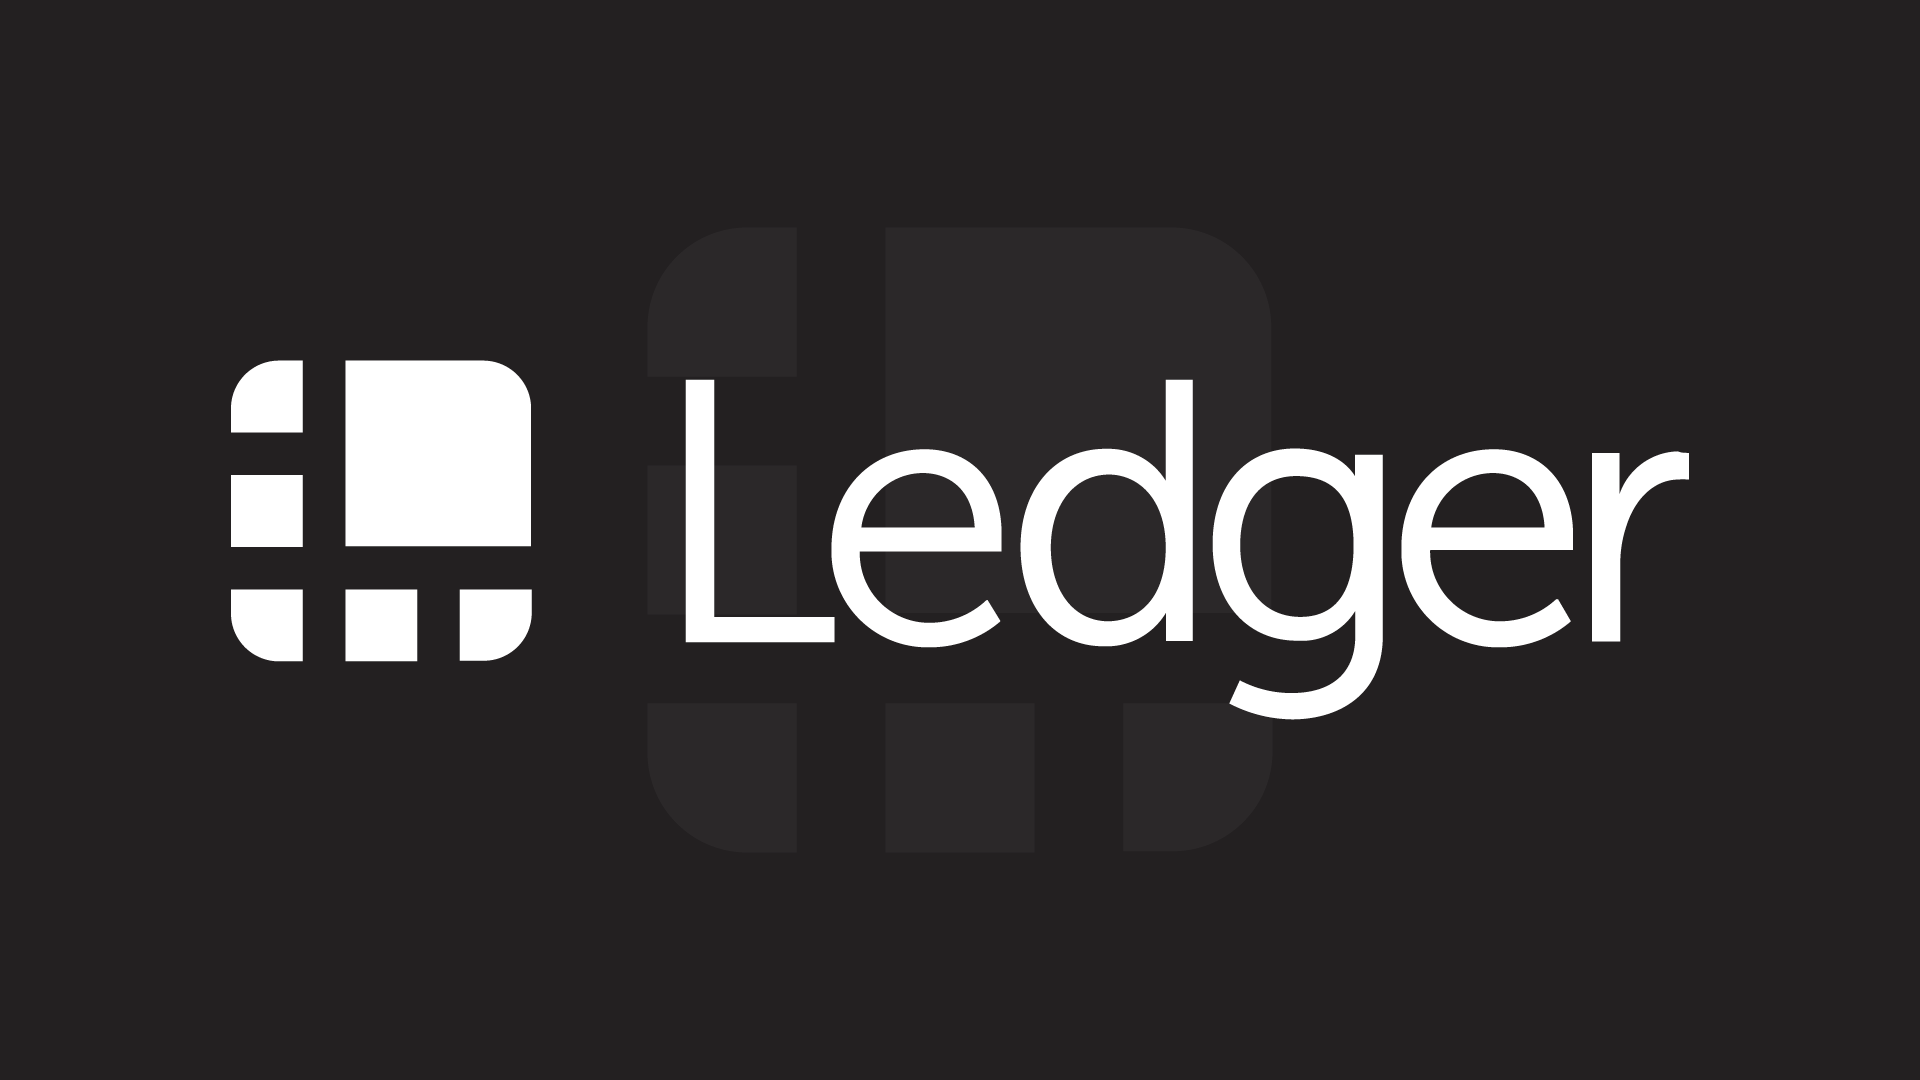 Ledger Vault Gets Its Own Custom Crime Insurance Policy